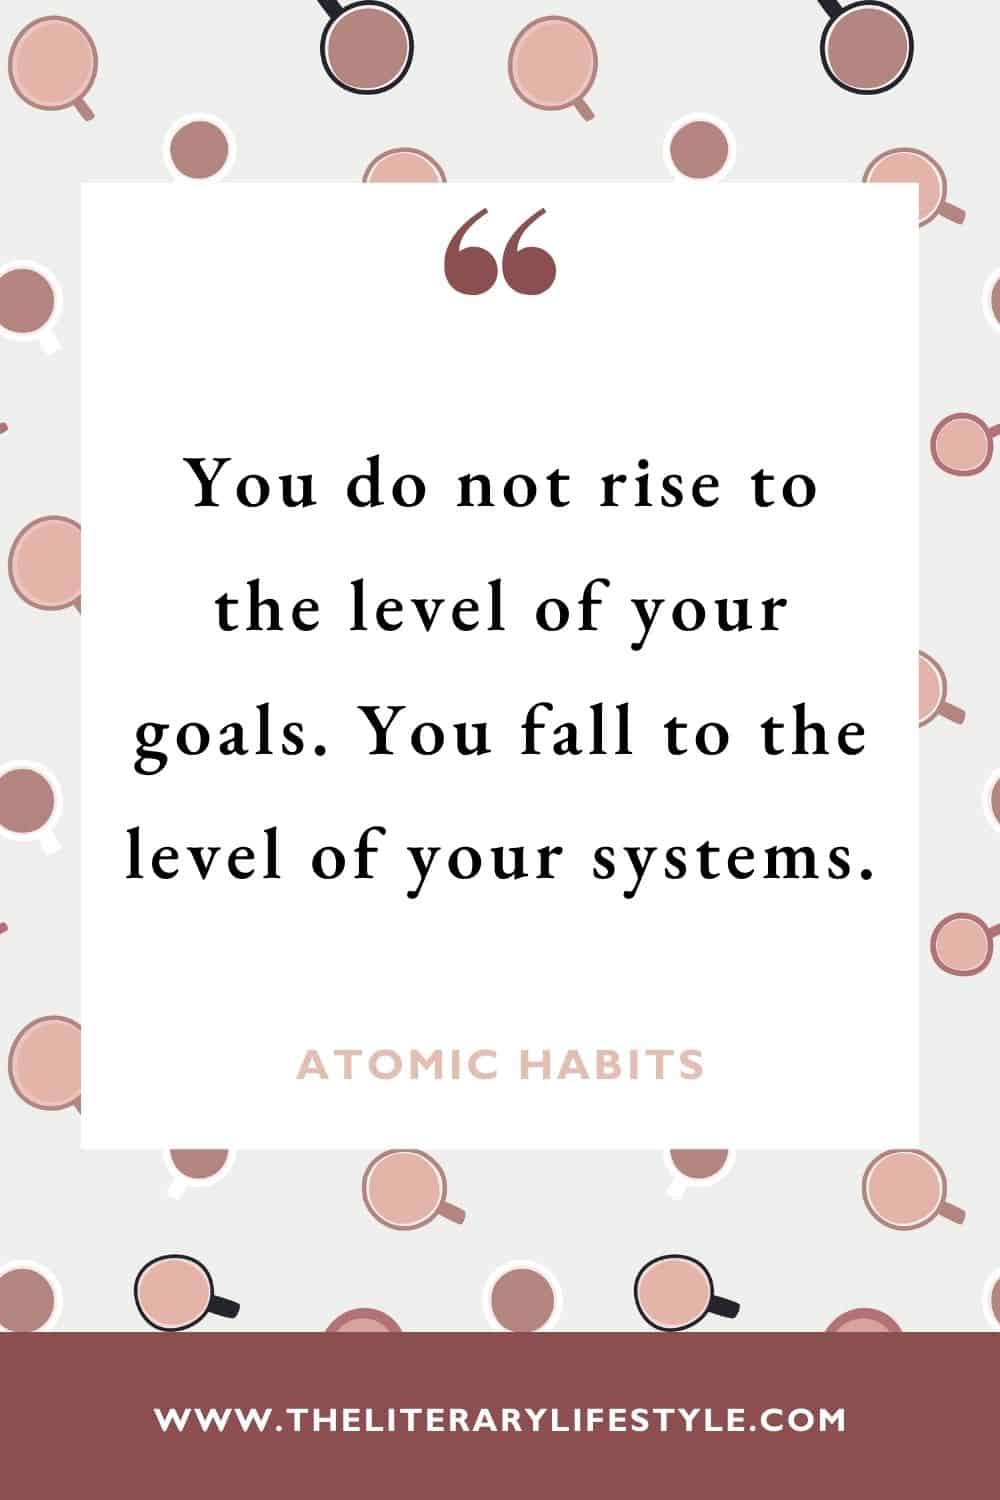 atomic habits quote about goals and systems